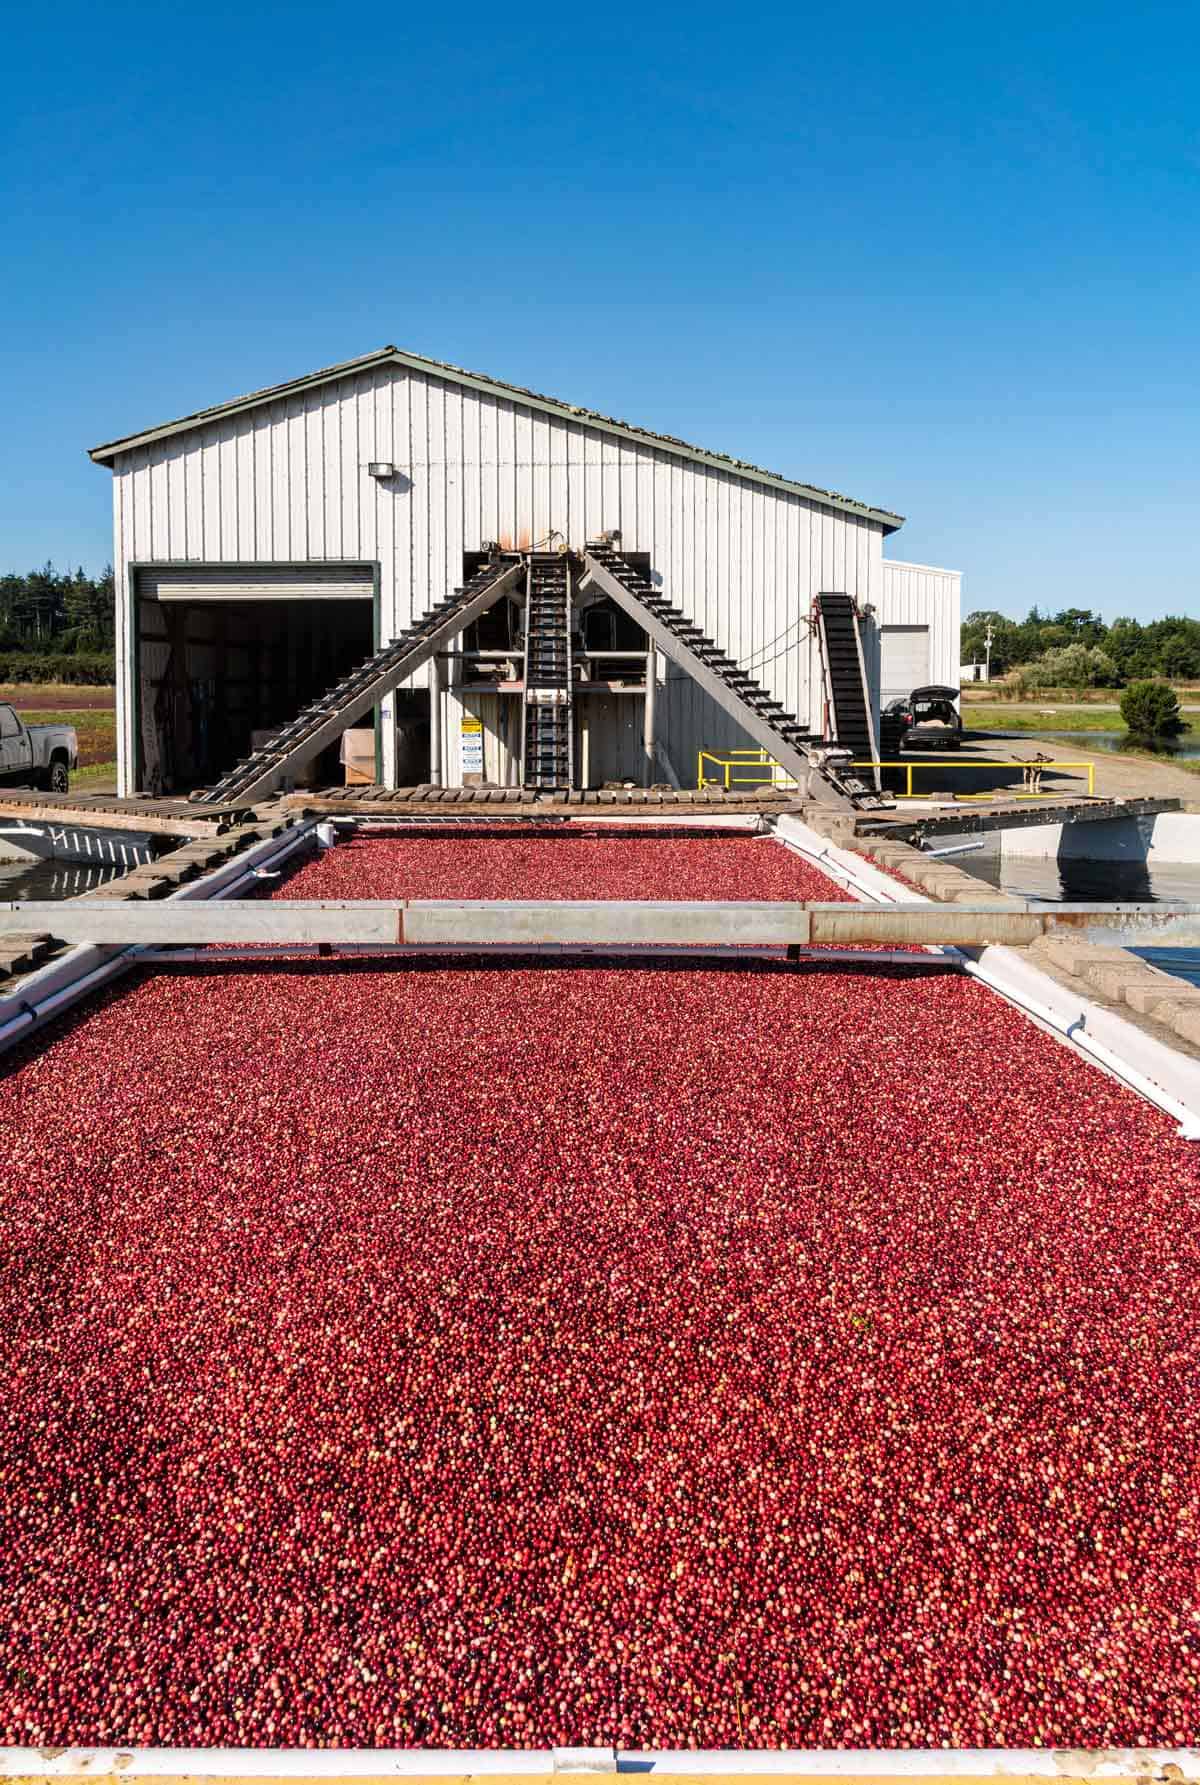 Cranberry processing plant with cranberries outdoors.